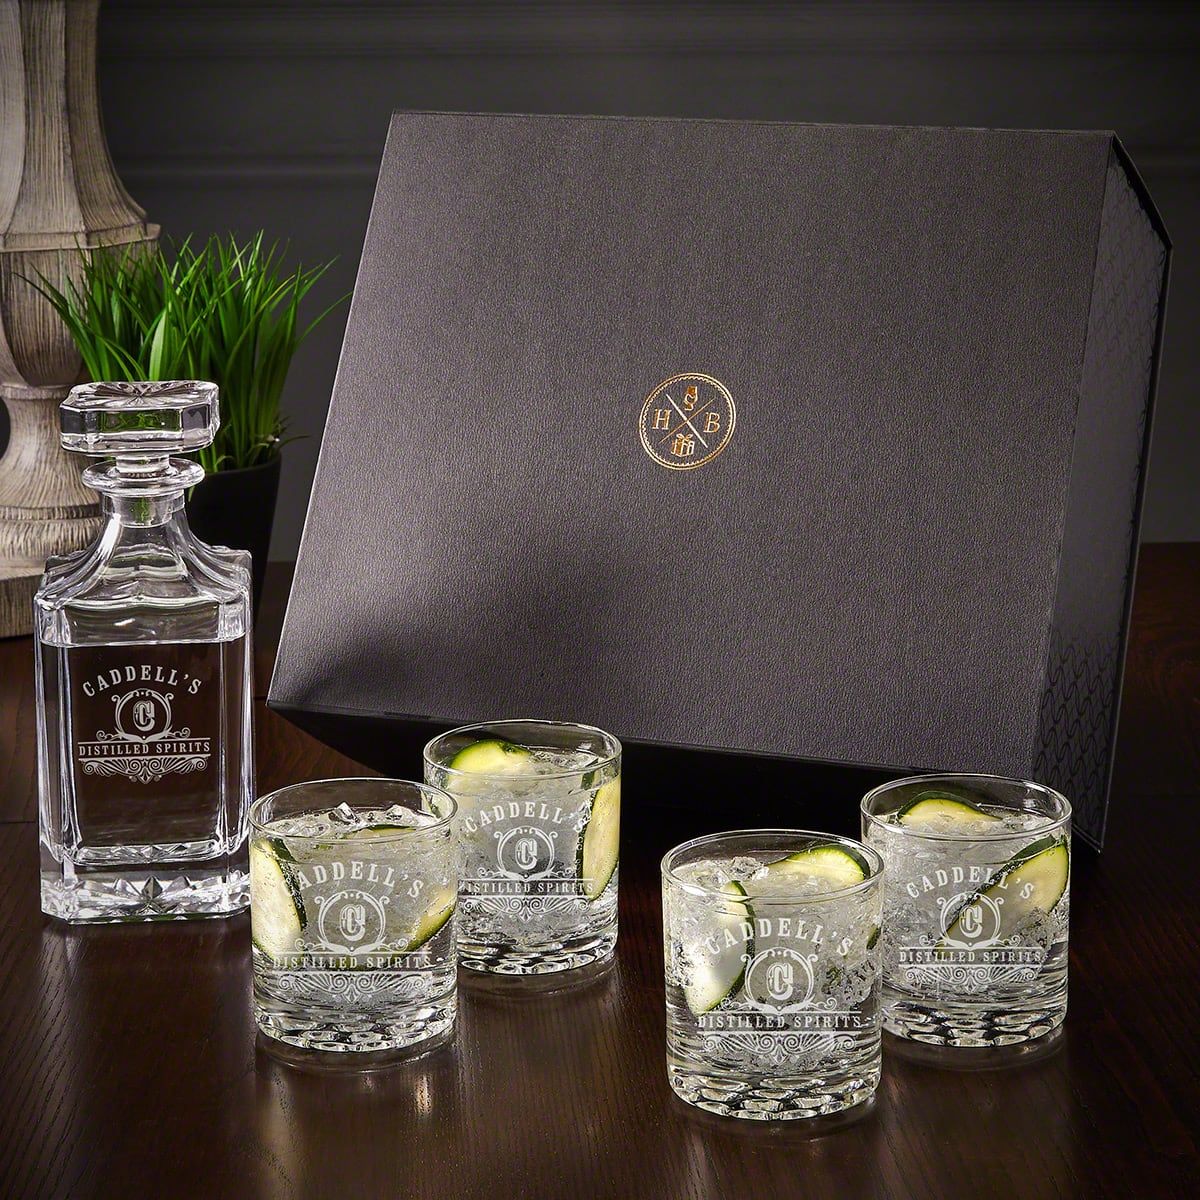 https://images.homewetbar.com/media/catalog/product/p/e/personalized-gin-decanter-gift-set-cocktail-glasses-carraway-p-10703.jpg?store=default&image-type=image